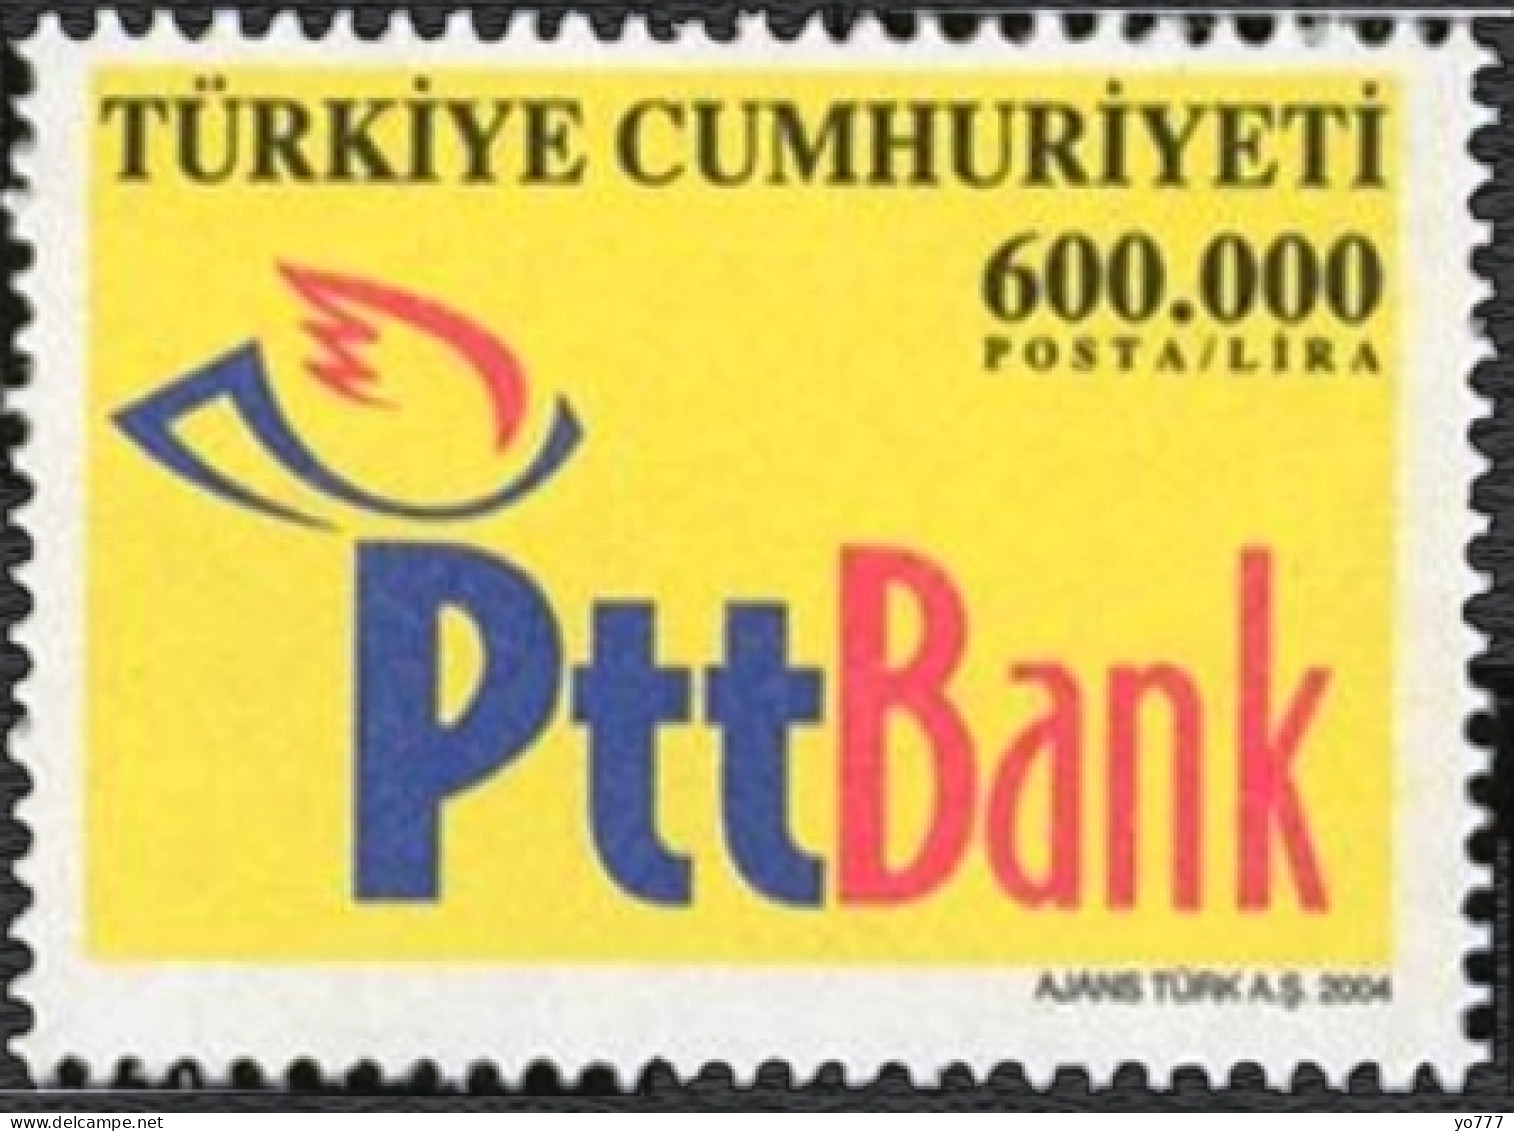 (3369) TURKEY REGULAR ISSUE STAMPS WITH THE THEME OF PTT BANK MNH** - Nuevos